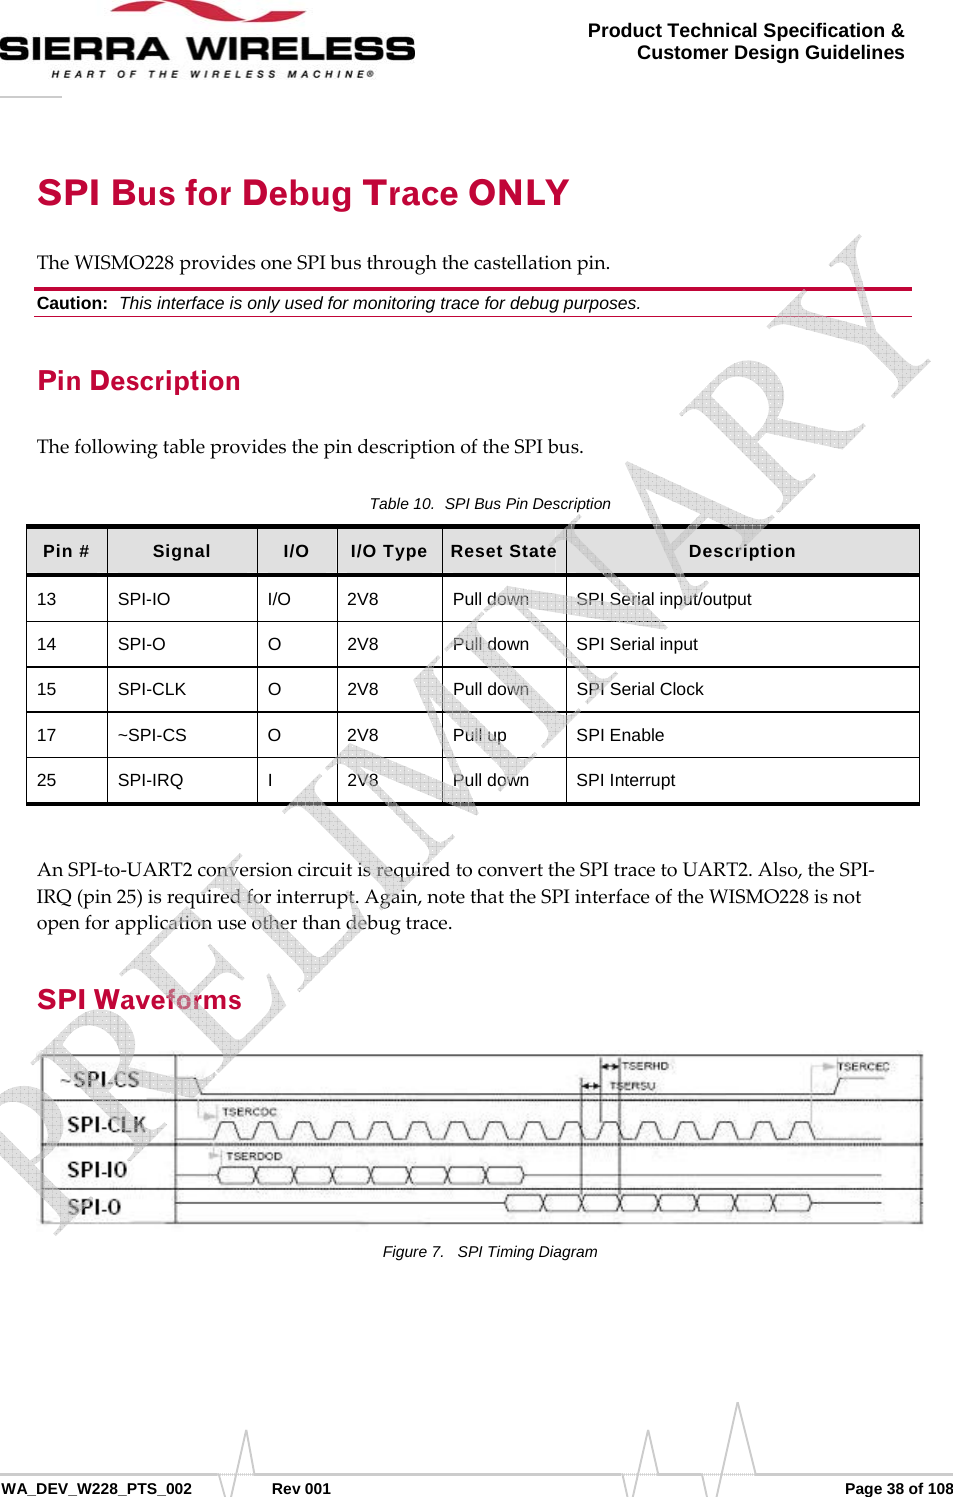      WA_DEV_W228_PTS_002 Rev 001  Page 38 of 108 Product Technical Specification &amp; Customer Design Guidelines SPI Bus for Debug Trace ONLY TheWISMO228providesoneSPIbusthroughthecastellationpin.Caution:  This interface is only used for monitoring trace for debug purposes. Pin Description ThefollowingtableprovidesthepindescriptionoftheSPIbus.Table 10.  SPI Bus Pin Description Pin #  Signal  I/O  I/O Type  Reset State Description 13  SPI-IO  I/O  2V8  Pull down  SPI Serial input/output 14 SPI-O  O  2V8  Pull down SPI Serial input 15 SPI-CLK  O  2V8  Pull down SPI Serial Clock 17 ~SPI-CS  O  2V8  Pull up  SPI Enable 25 SPI-IRQ  I  2V8  Pull down SPI Interrupt AnSPI‐to‐UART2conversioncircuitisrequiredtoconverttheSPItracetoUART2.Also,theSPI‐IRQ(pin25)isrequiredforinterrupt.Again,notethattheSPIinterfaceoftheWISMO228isnotopenforapplicationuseotherthandebugtrace.SPI Waveforms Figure 7.  SPI Timing Diagram    